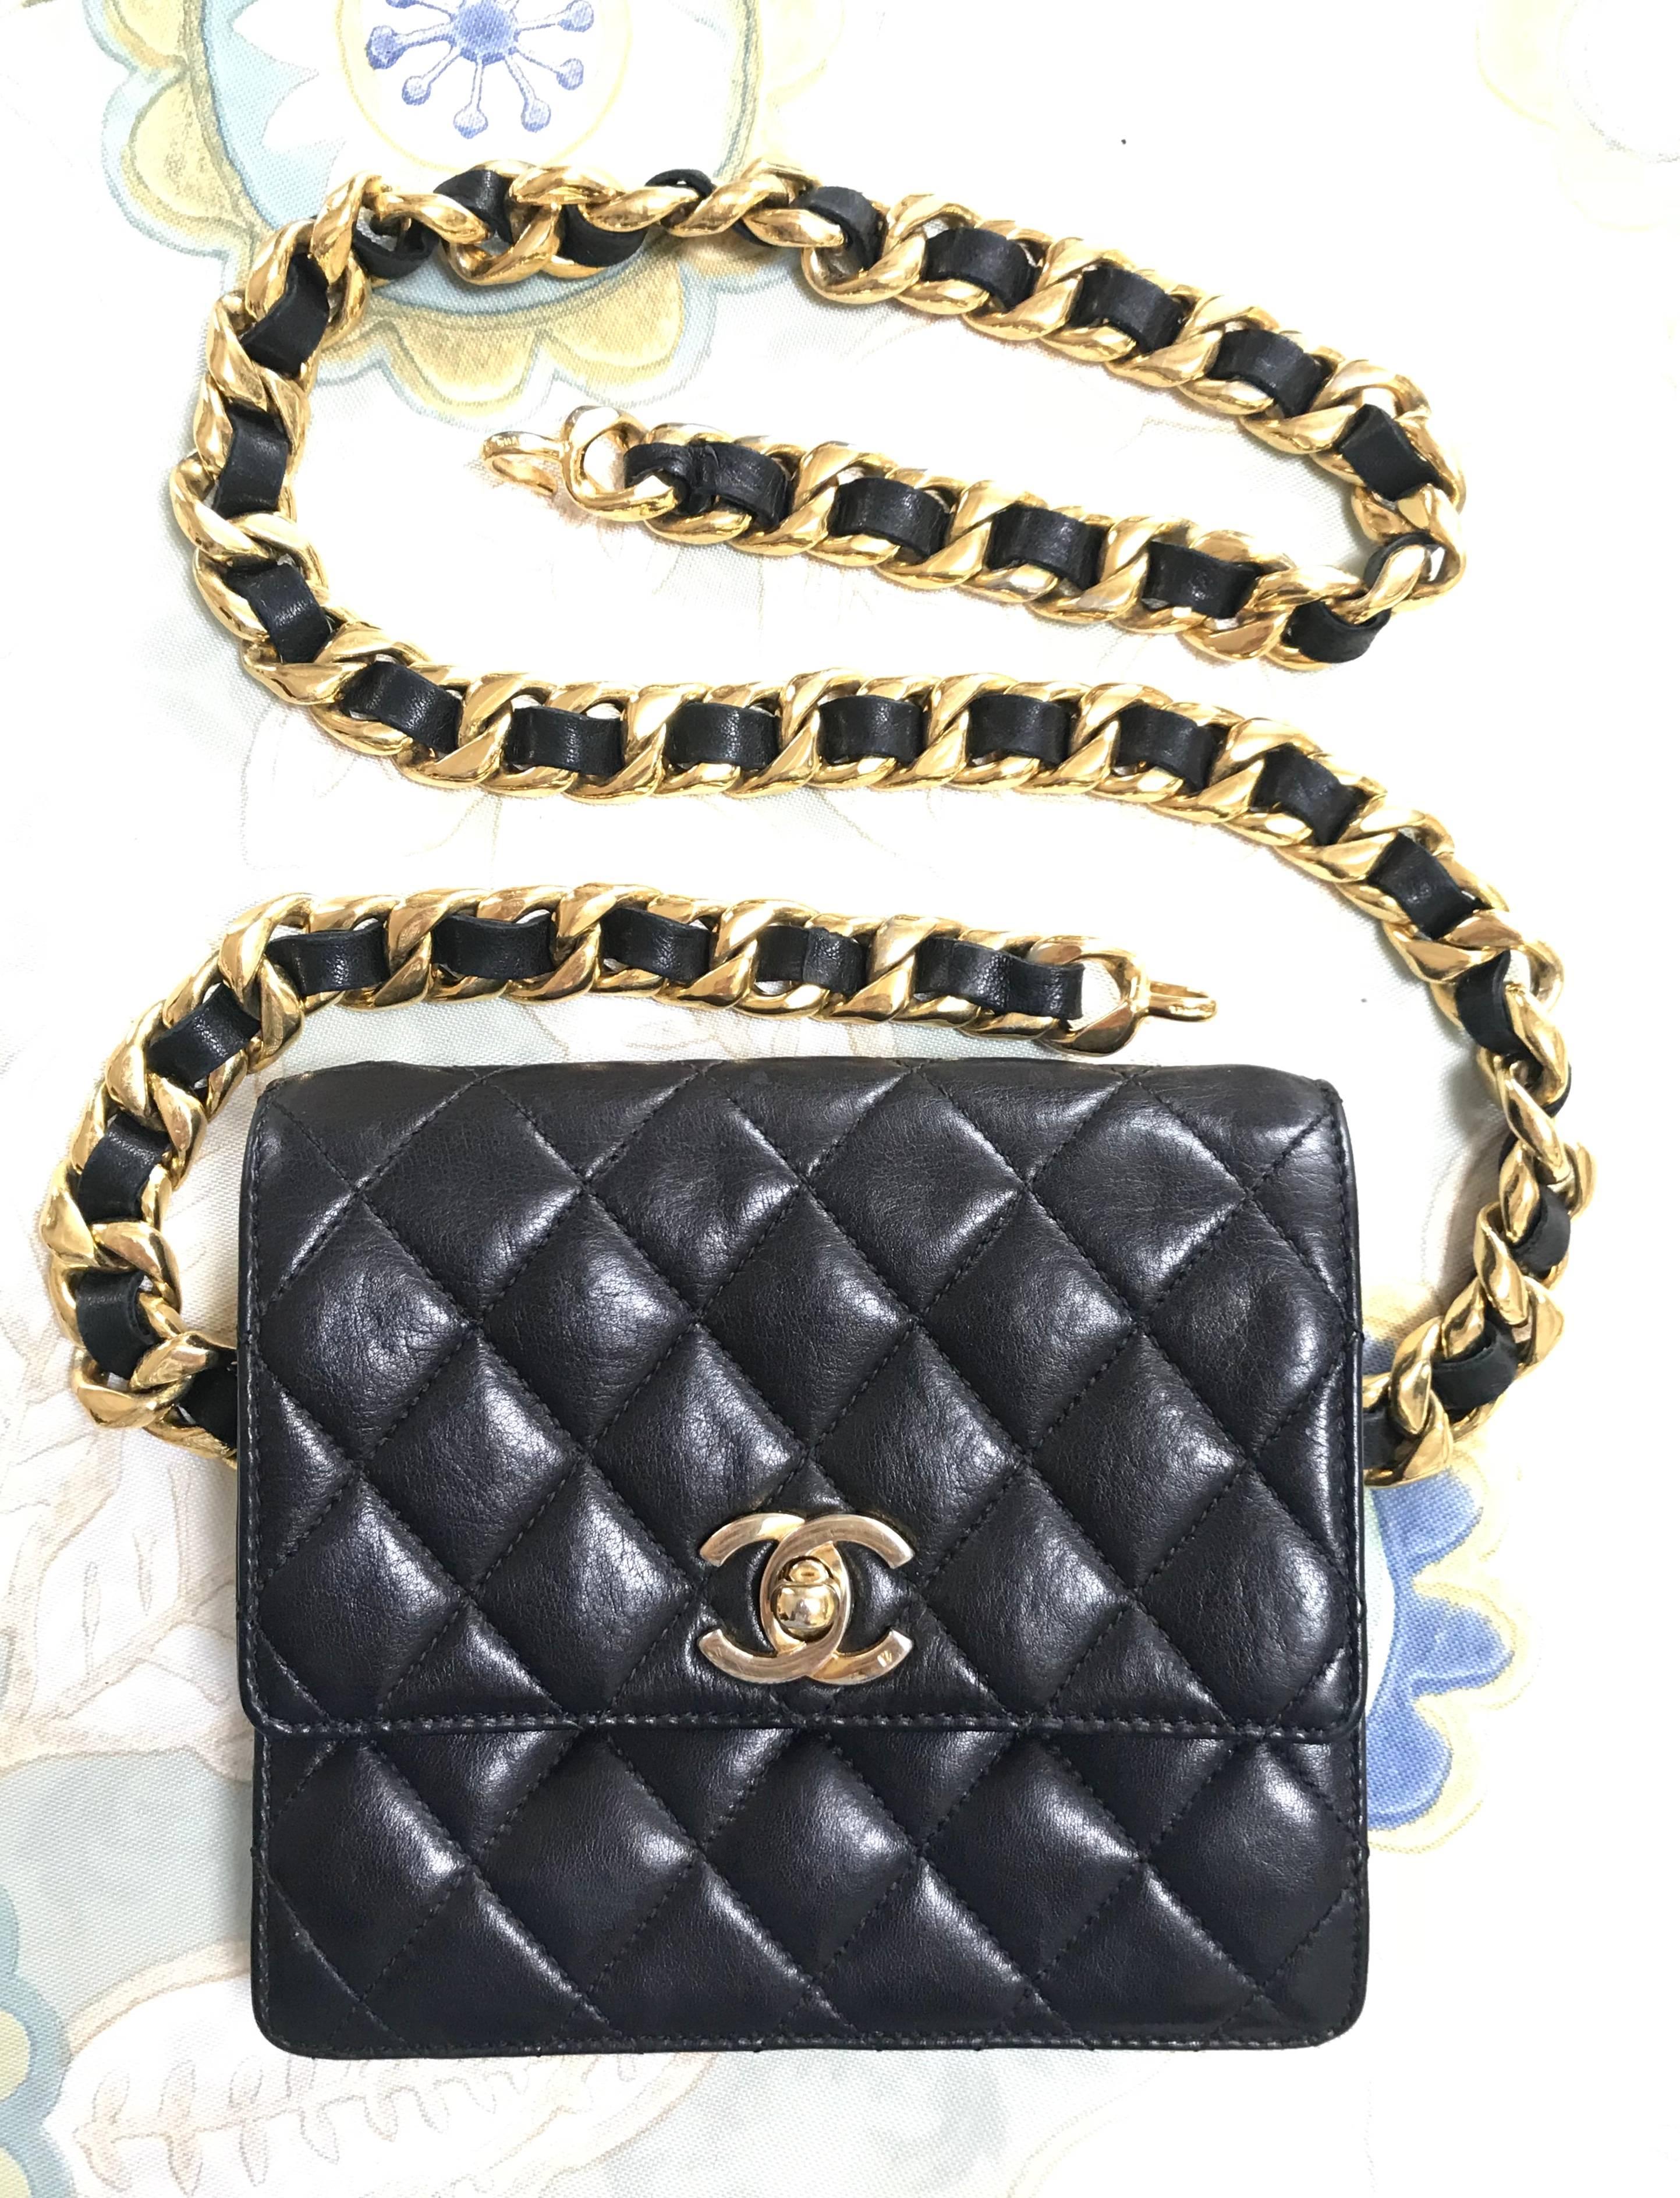 1990s. Vintage Chanel square 2.55 black fanny pack, pouch bag with a thick golden chain belt.

*****Please note that the belt is not the original matching belt but another vintage CHANEL belt from the 80’s.*****

Introducing a vintage CHANEL black